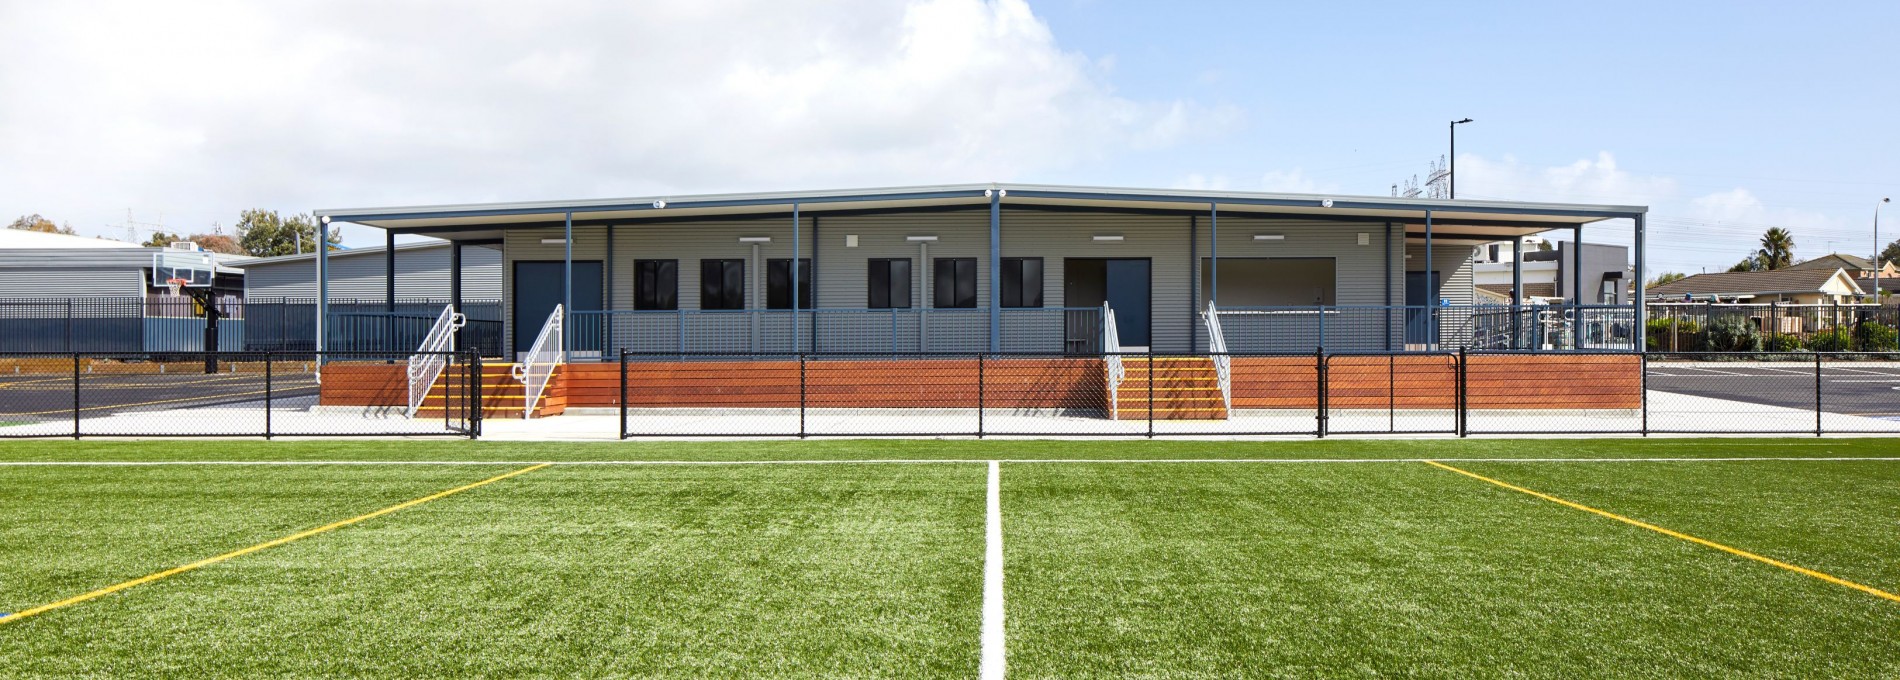 Exterior of Sports Club 